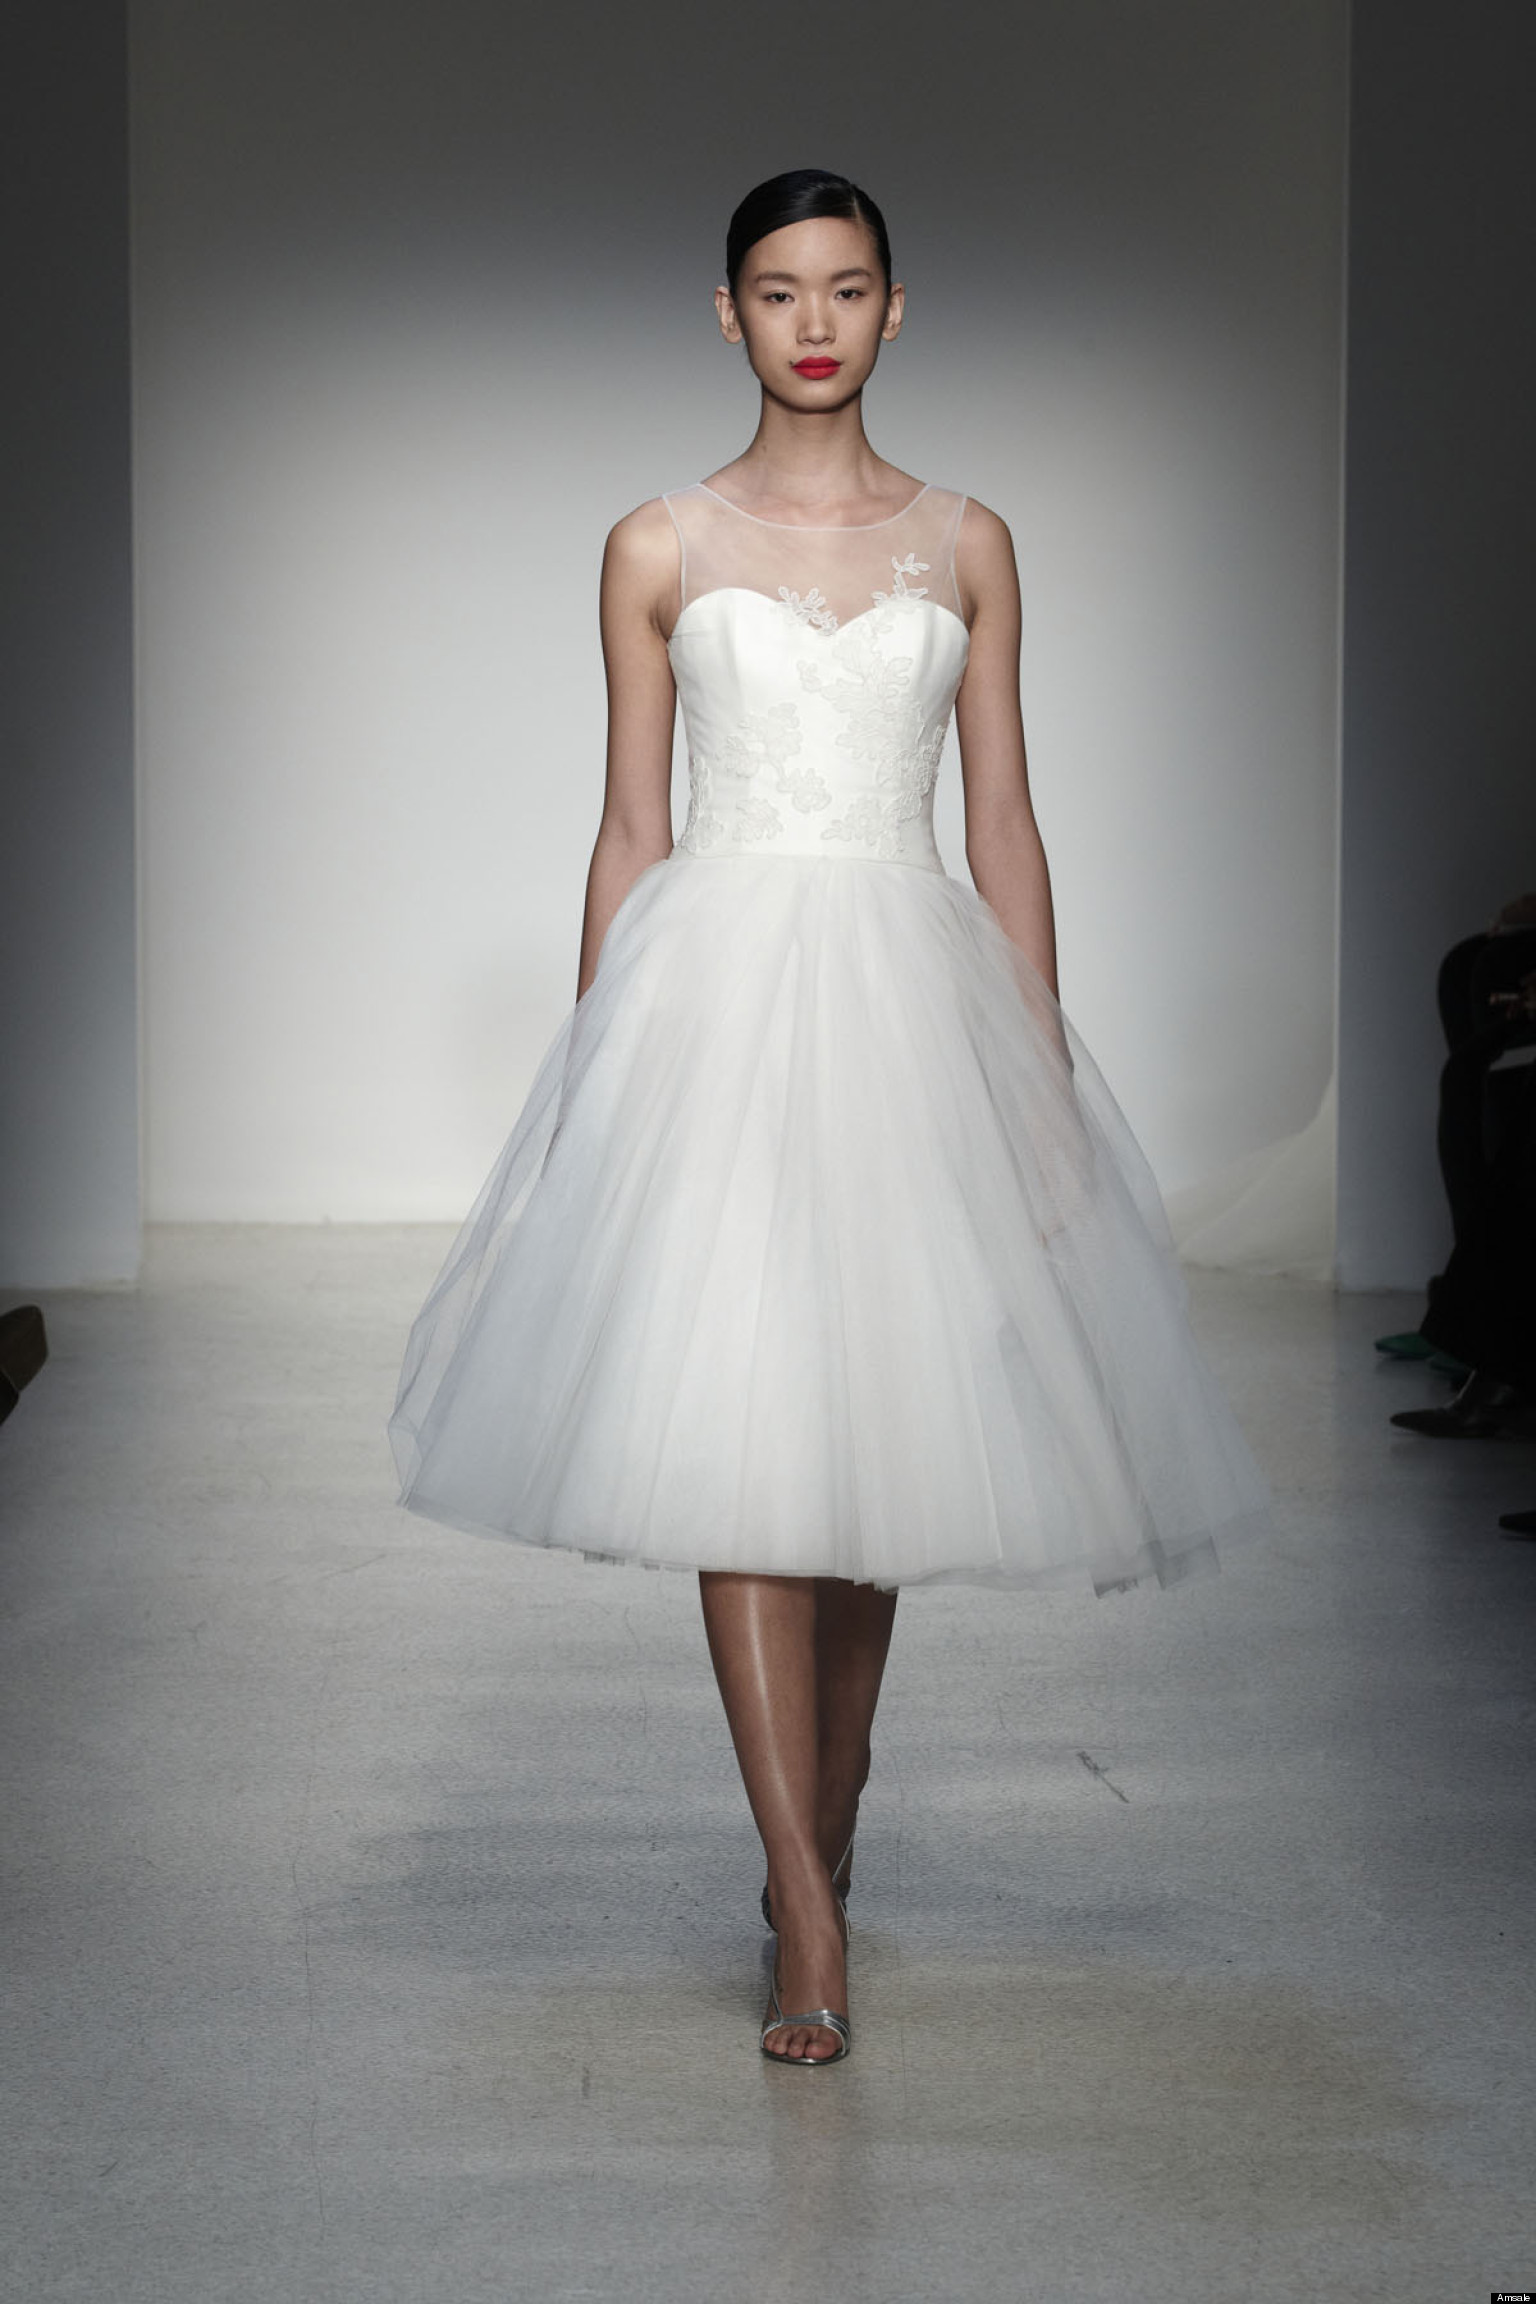 Great Amsale Wedding Dress Prices in the world Learn more here 